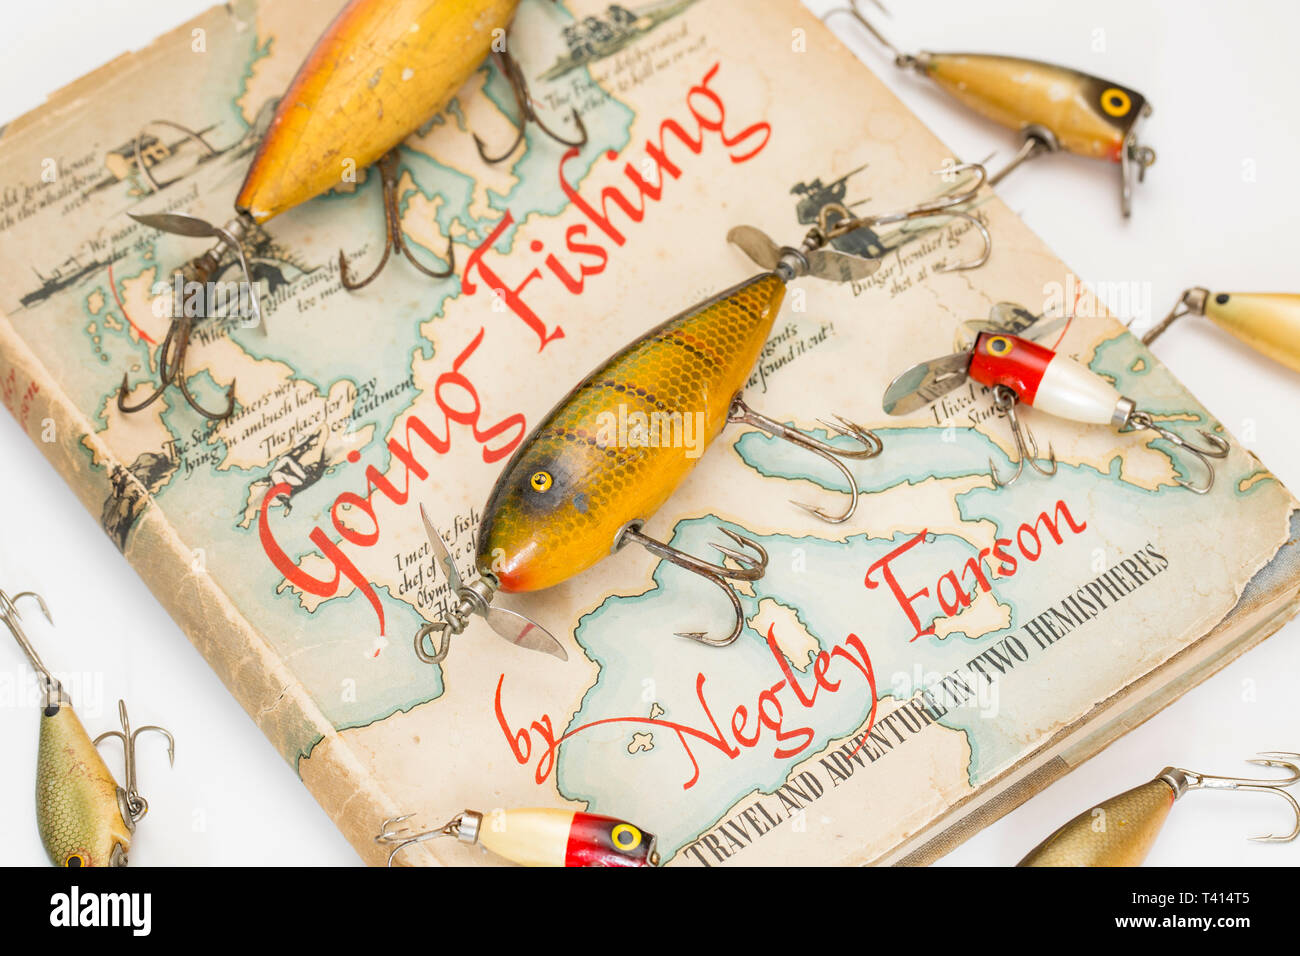 A reprinted 1943 edition of Negley Farson’s famous book Going Fishing illustrated by C.F. Tunnicliffe. The first edition being published in 1942. It h Stock Photo